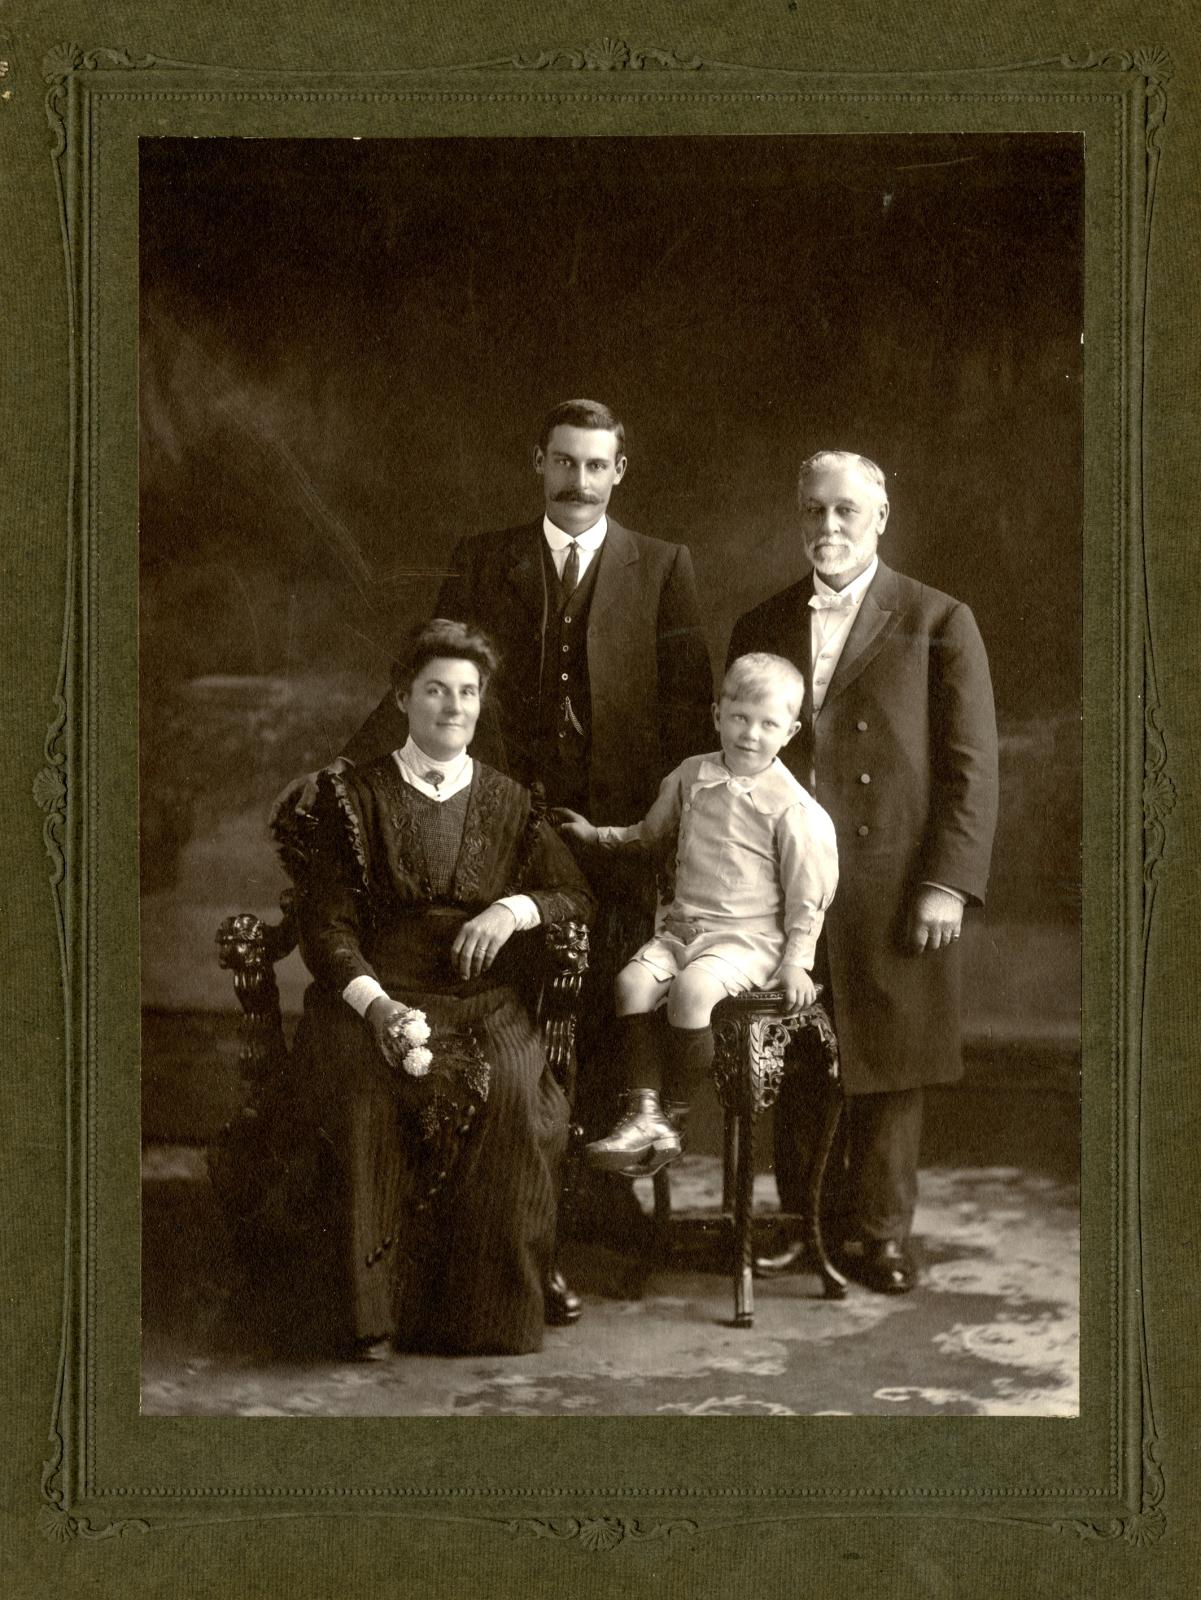 Family black and white studio portrait. Two men standing in background, wearing suits, man on left has dark hair and moustache, man on right white hair with moustache and beard. Front row is a woman, seated in a dark long sleeve, ankle length dress. To the right is a young boy, seated on a stool in shorts, collared shirt and wearing a bow tie.